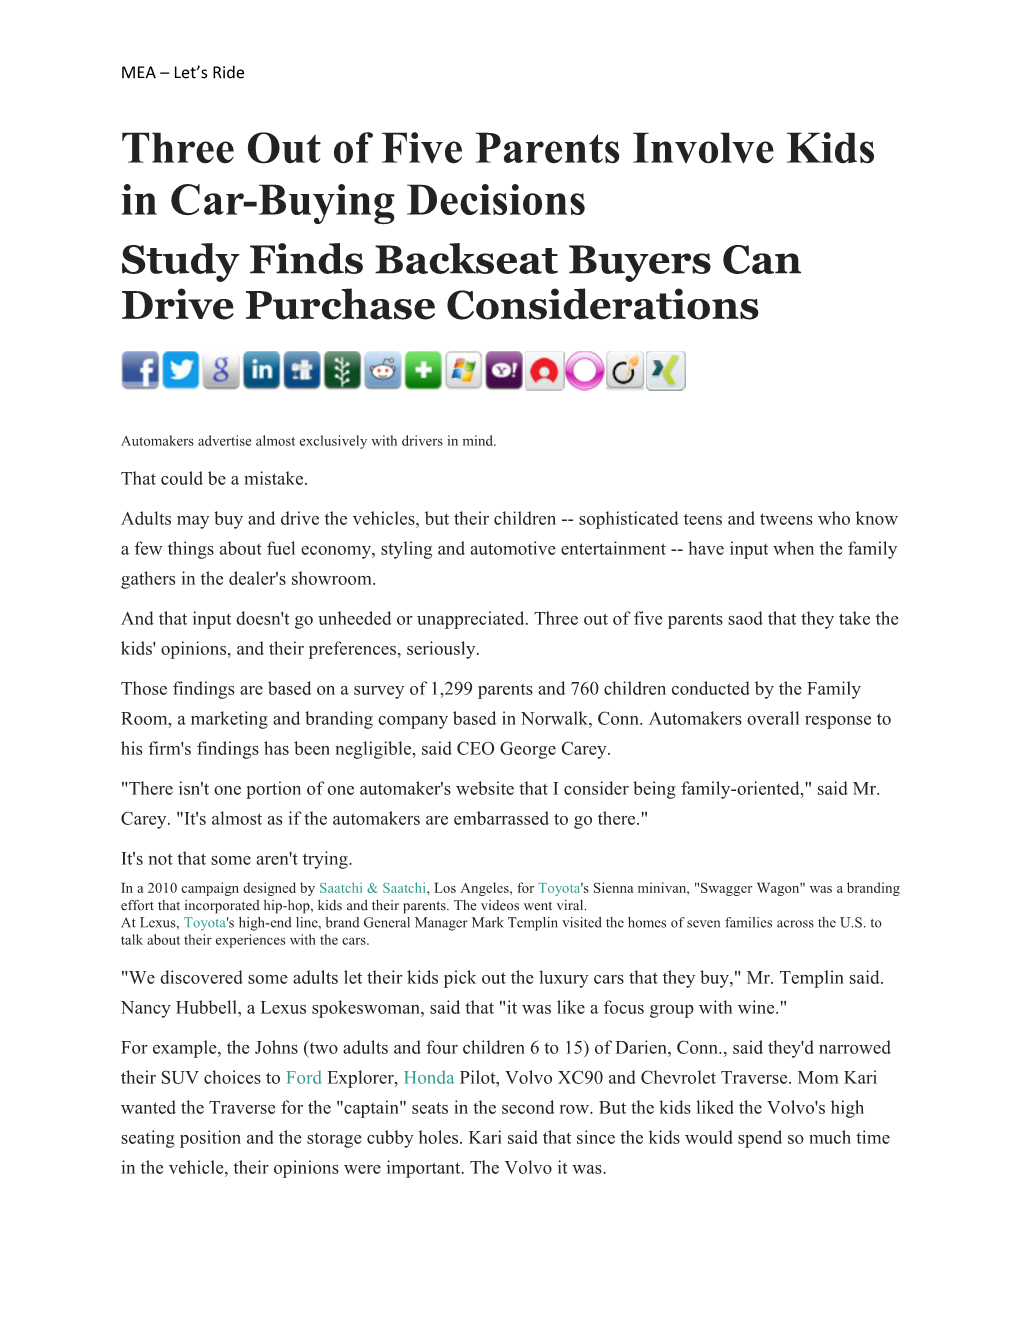 Study Finds Backseat Buyers Can Drive Purchase Considerations